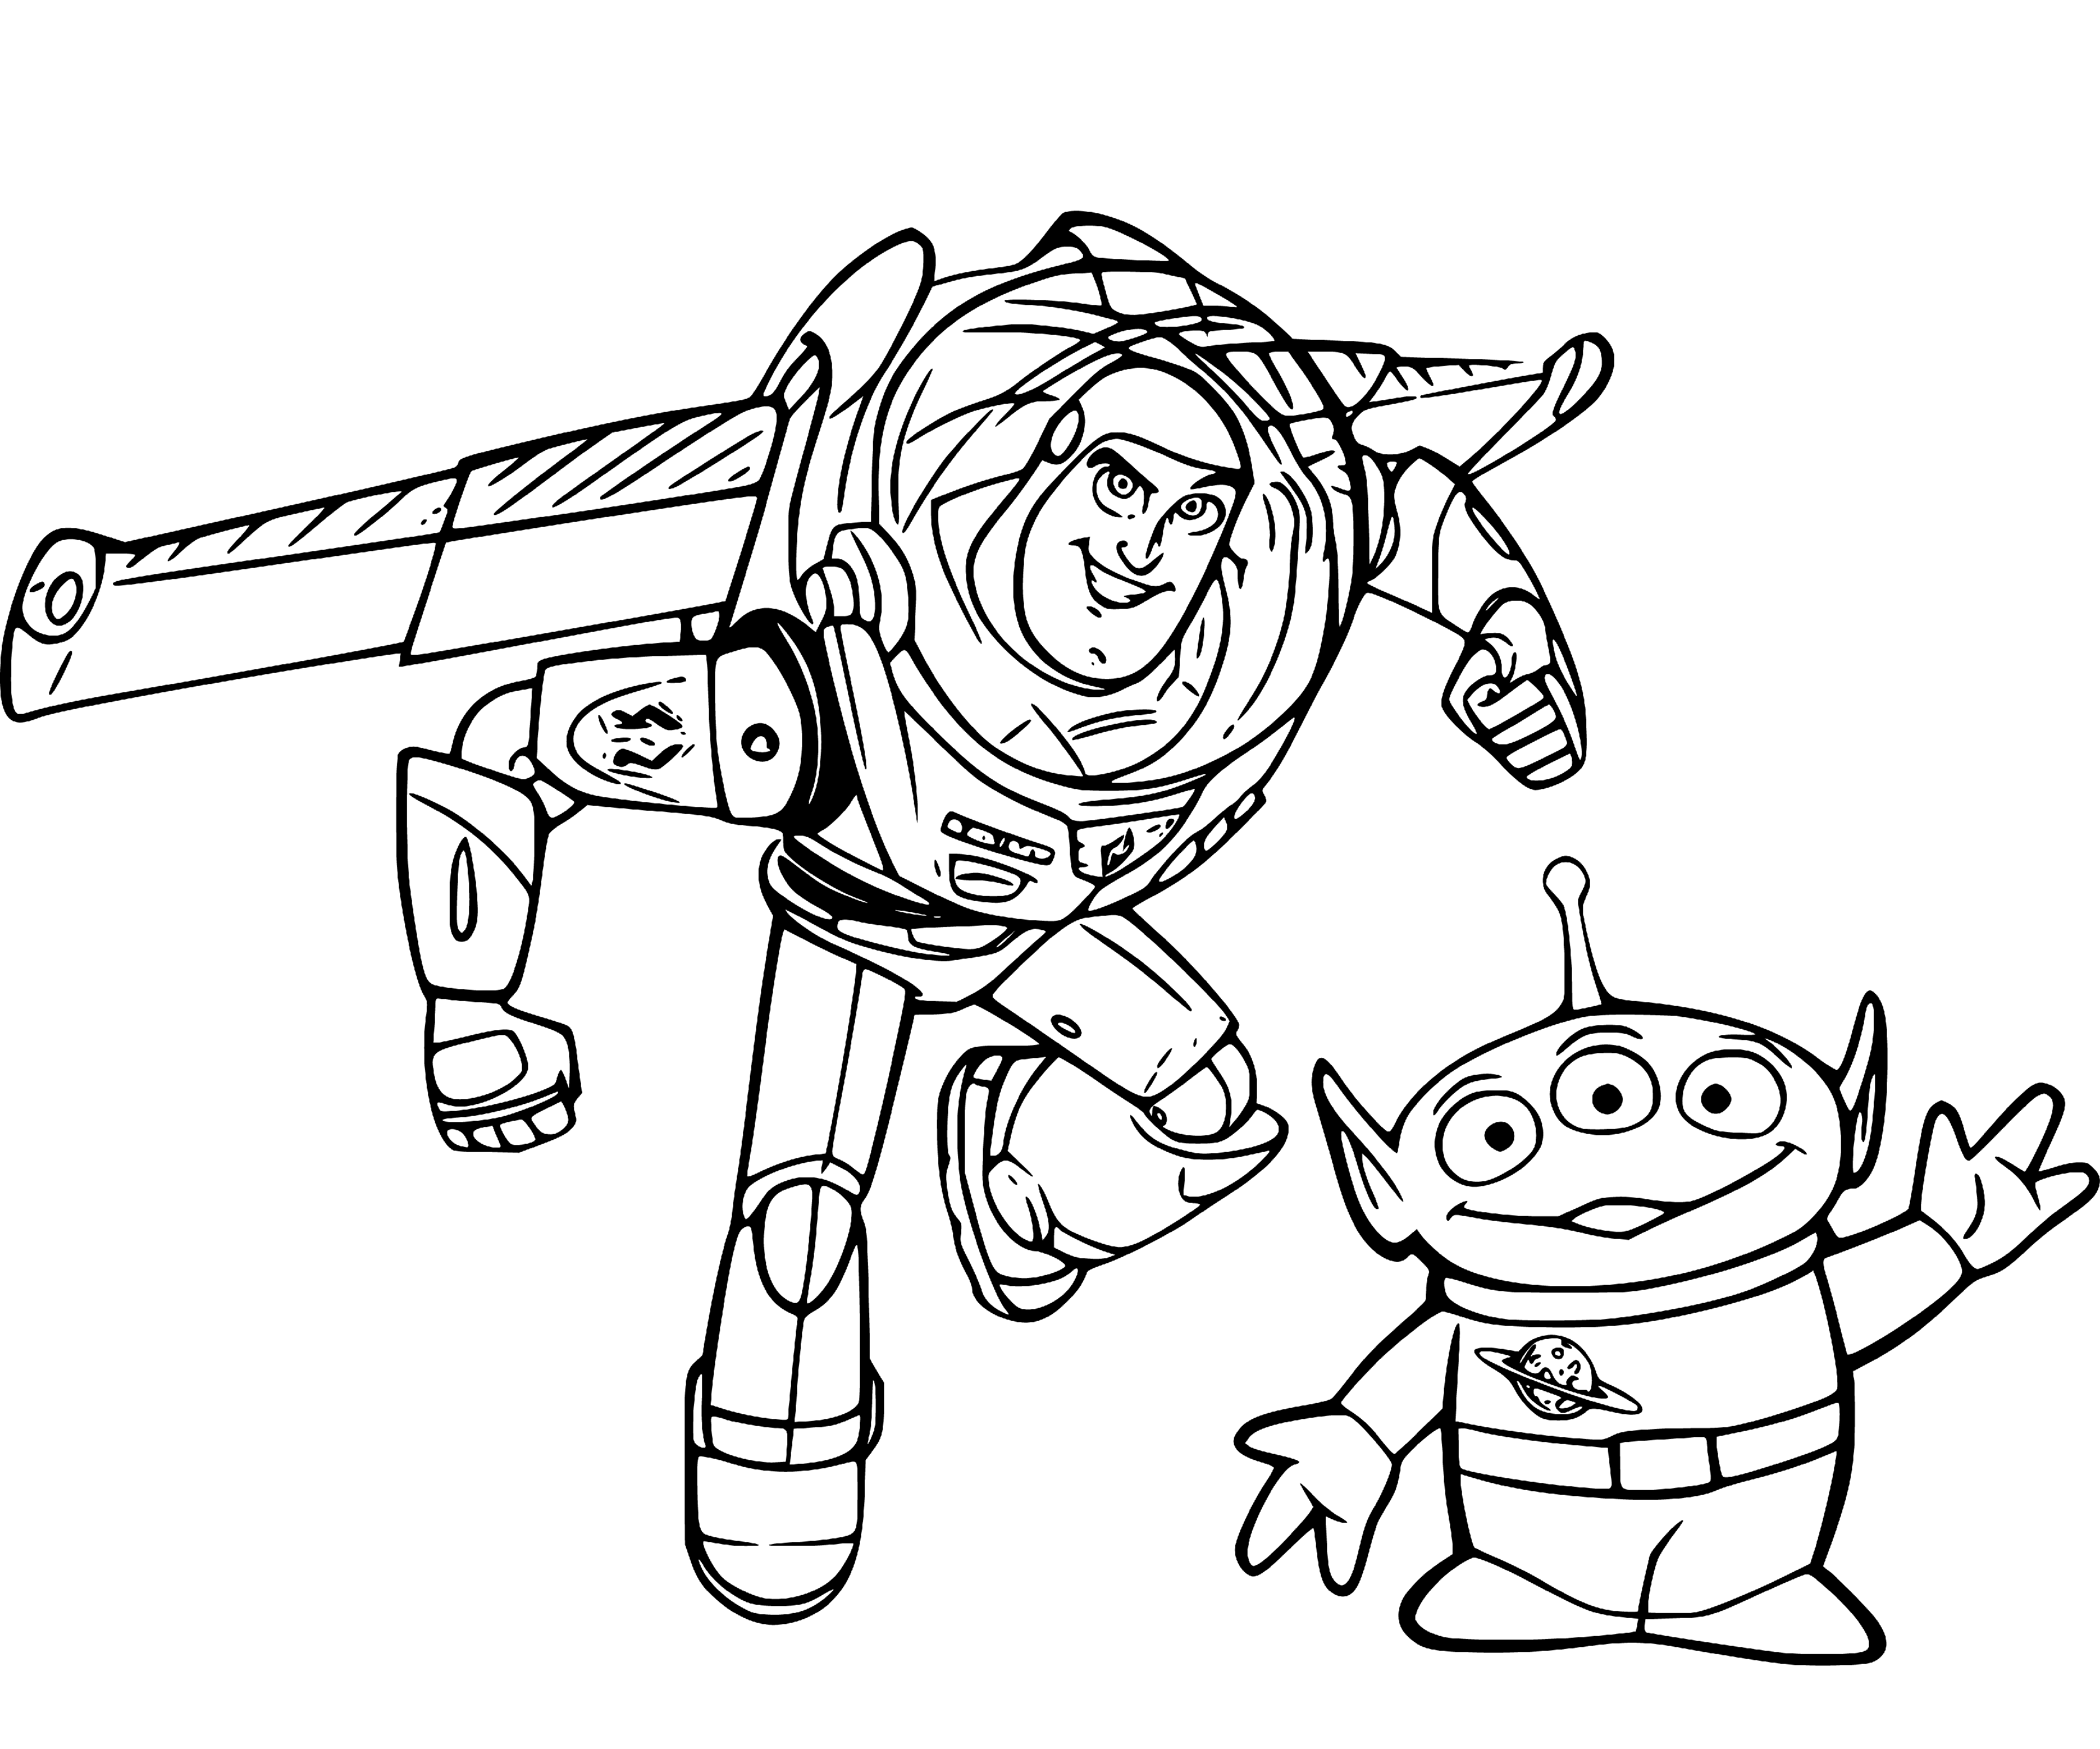 Toy Story Aliens and Buzz Lightyear Coloring Pages for Kids - SheetalColor.com